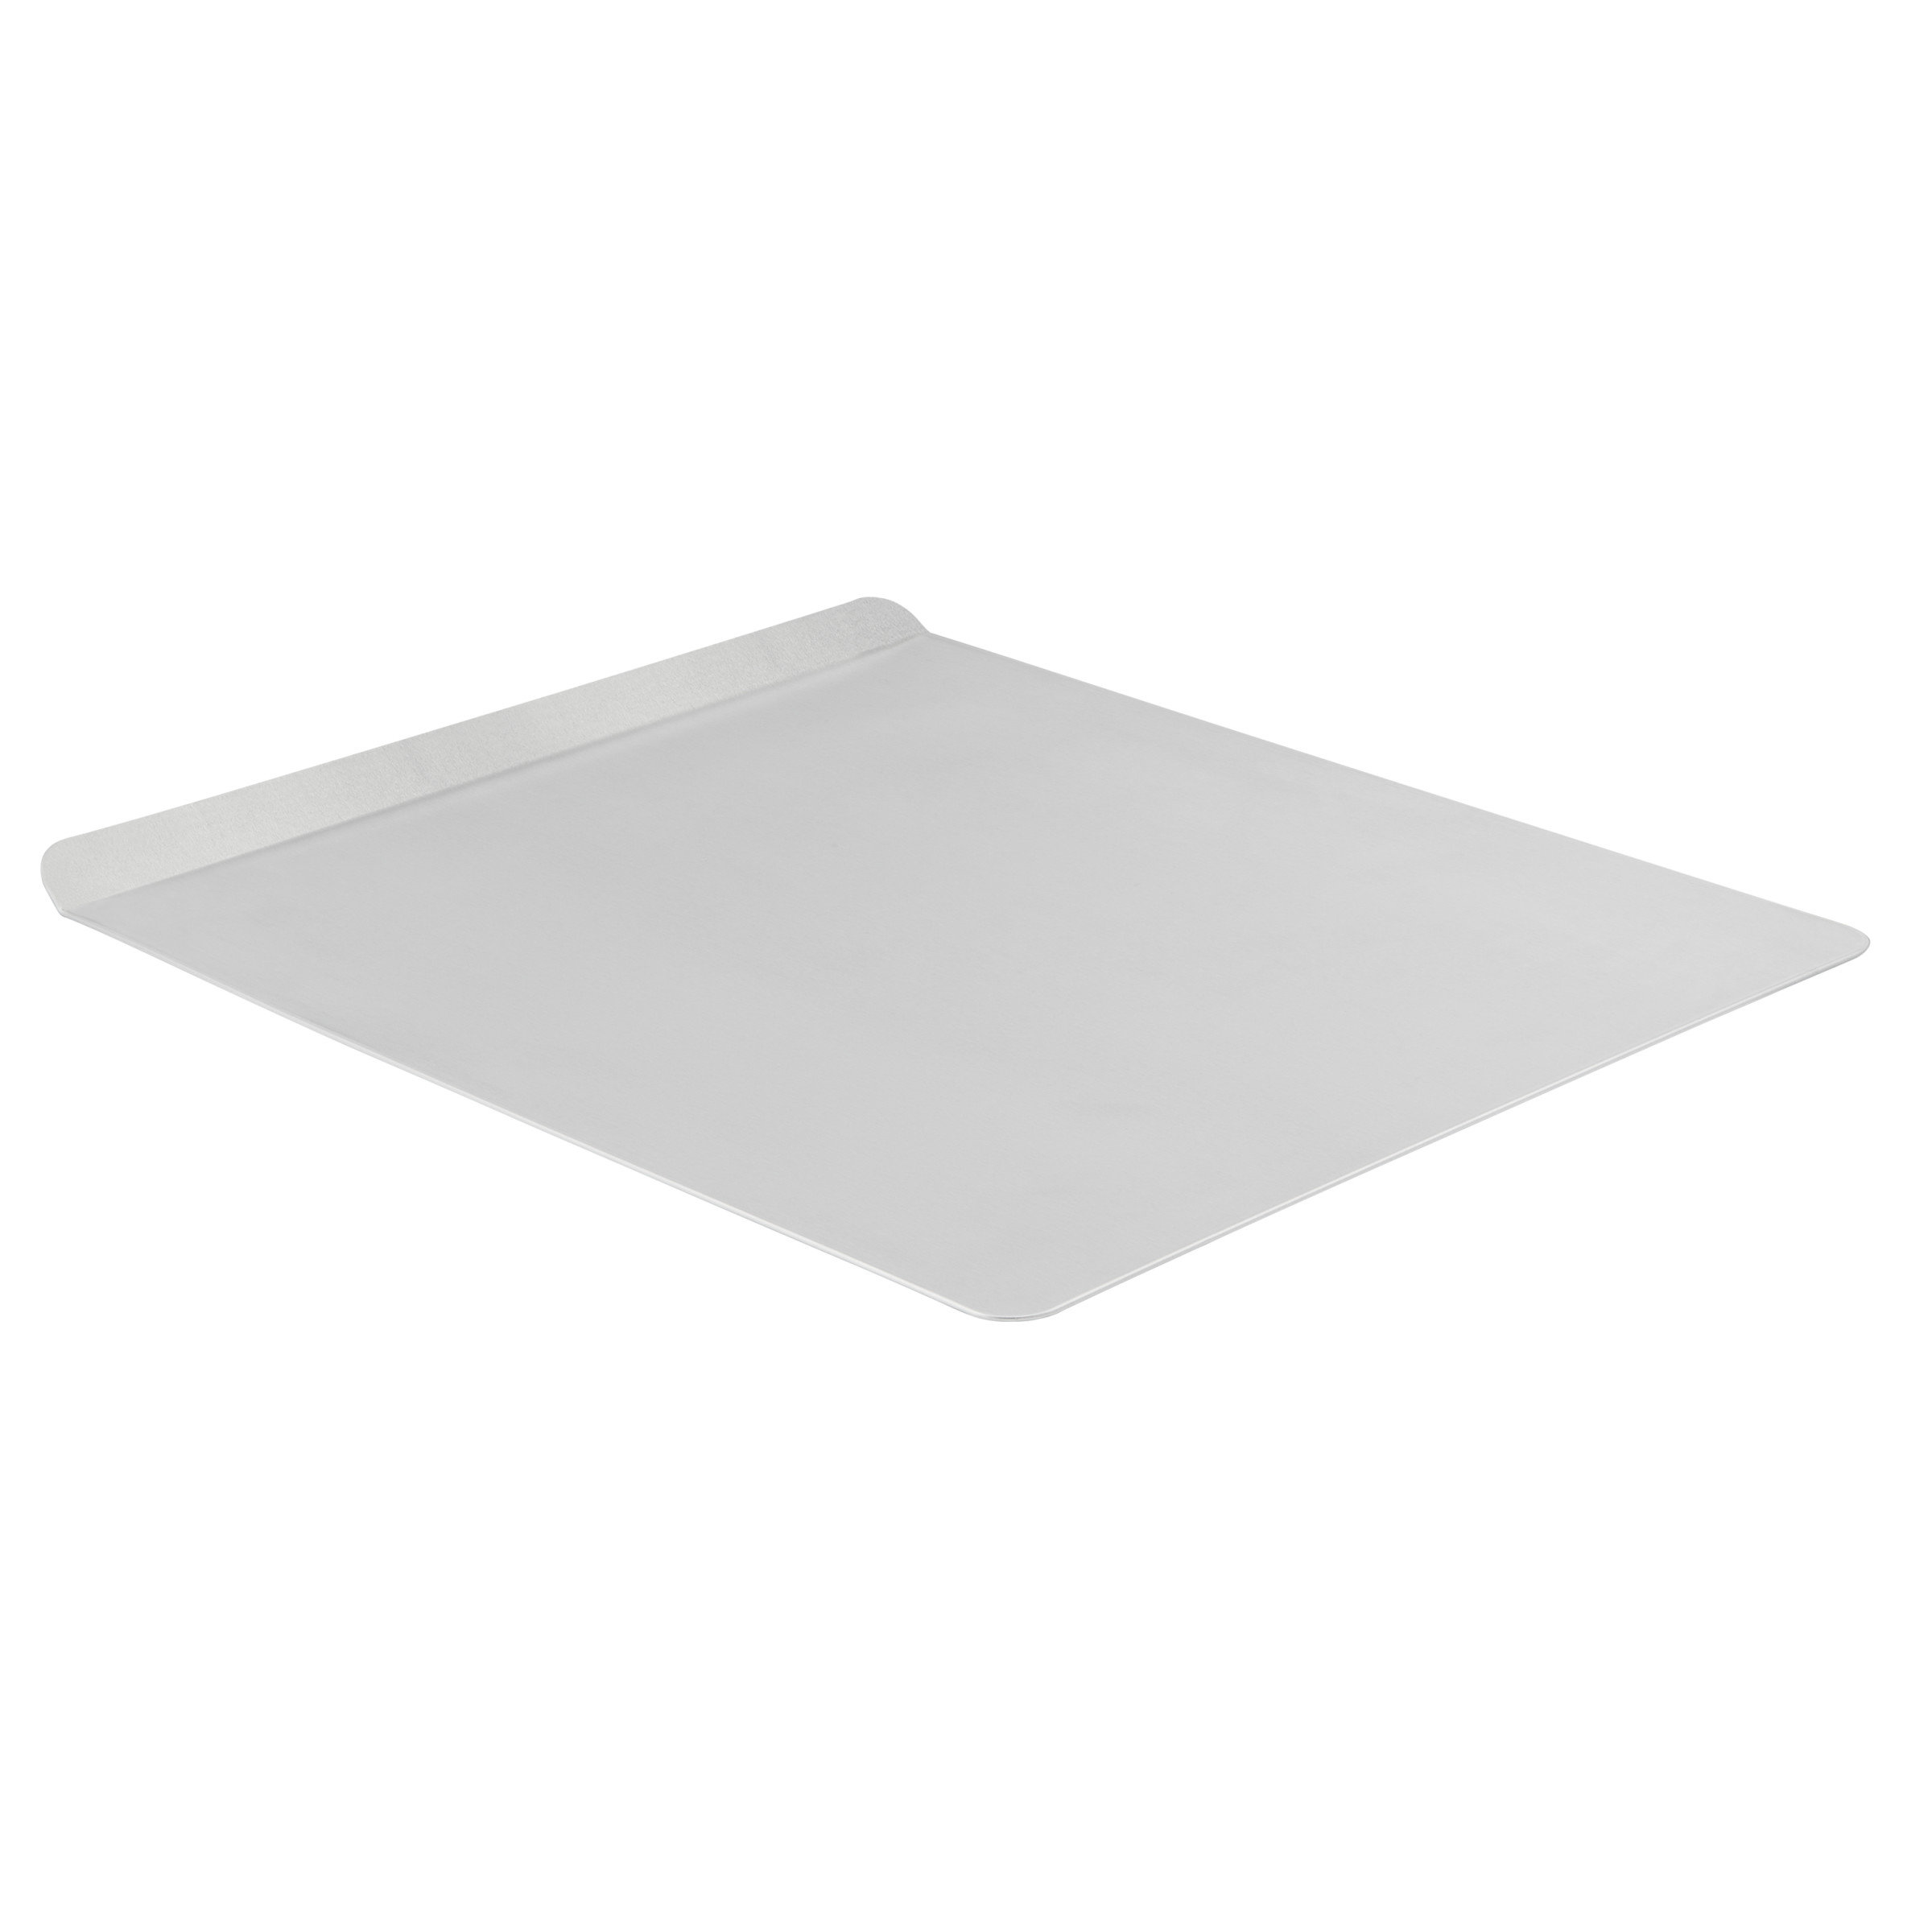 T-fal Airbake Natural Cookie Sheet, 3-piece Variety Set (16 X 14